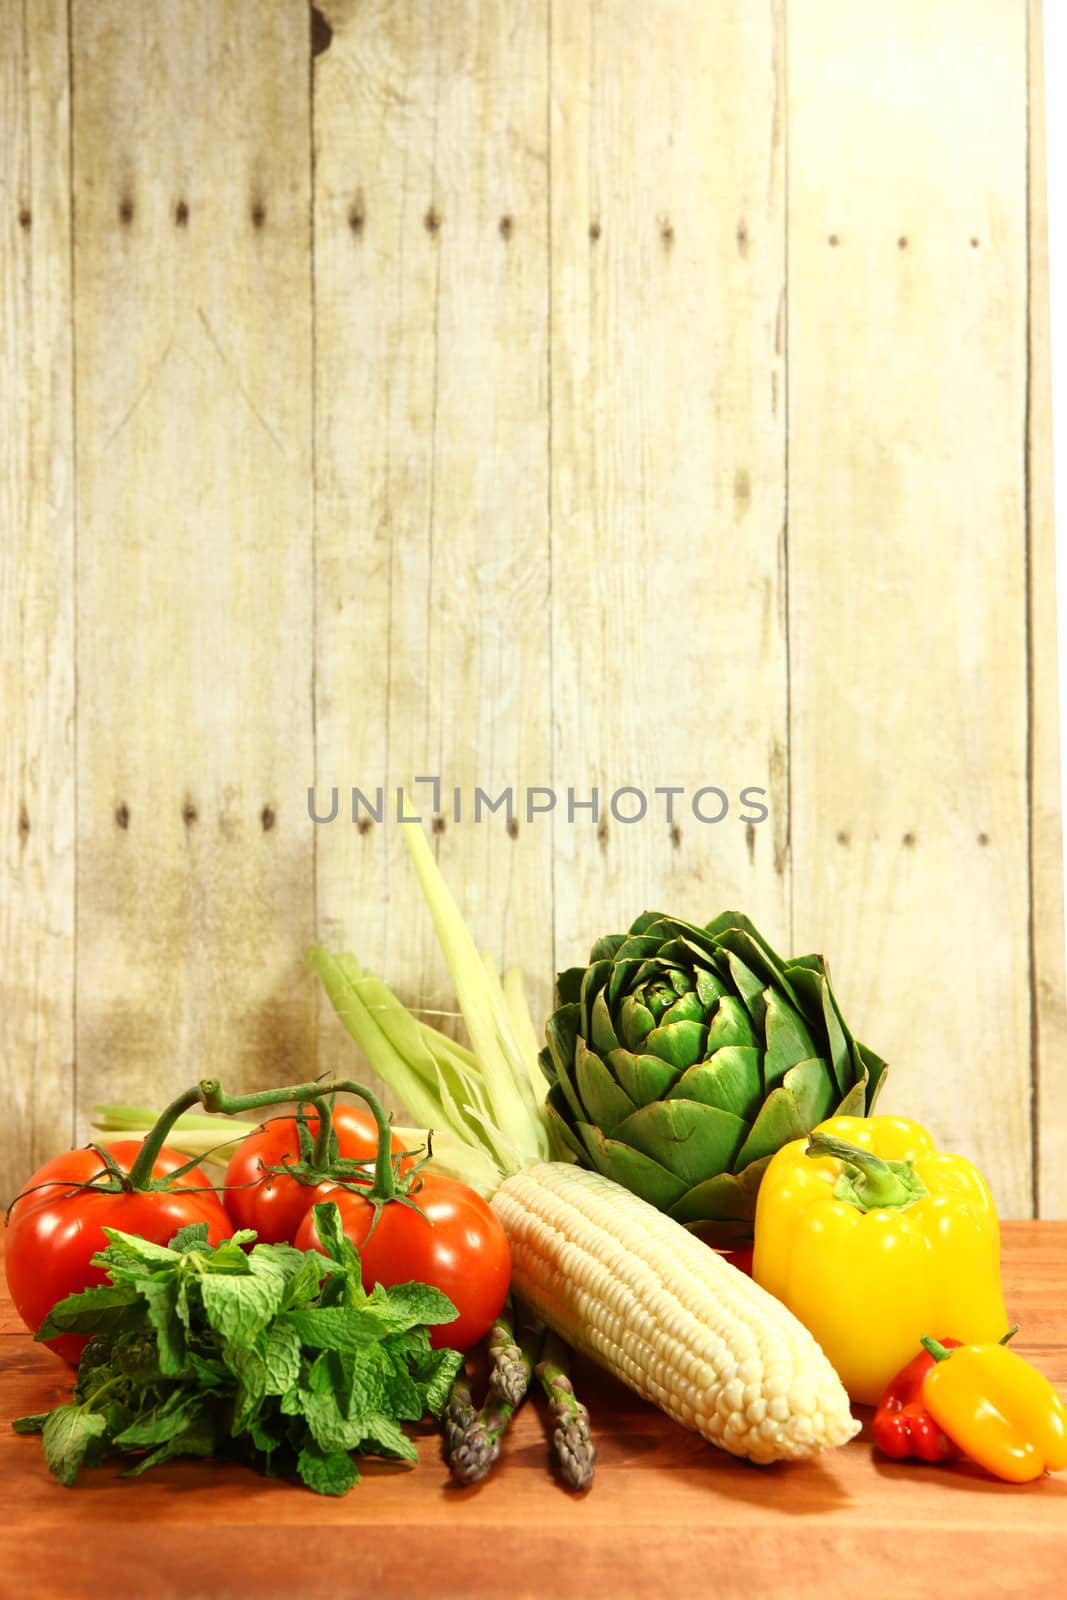 Grocery Produce Items on a Wooden Plank by tobkatrina